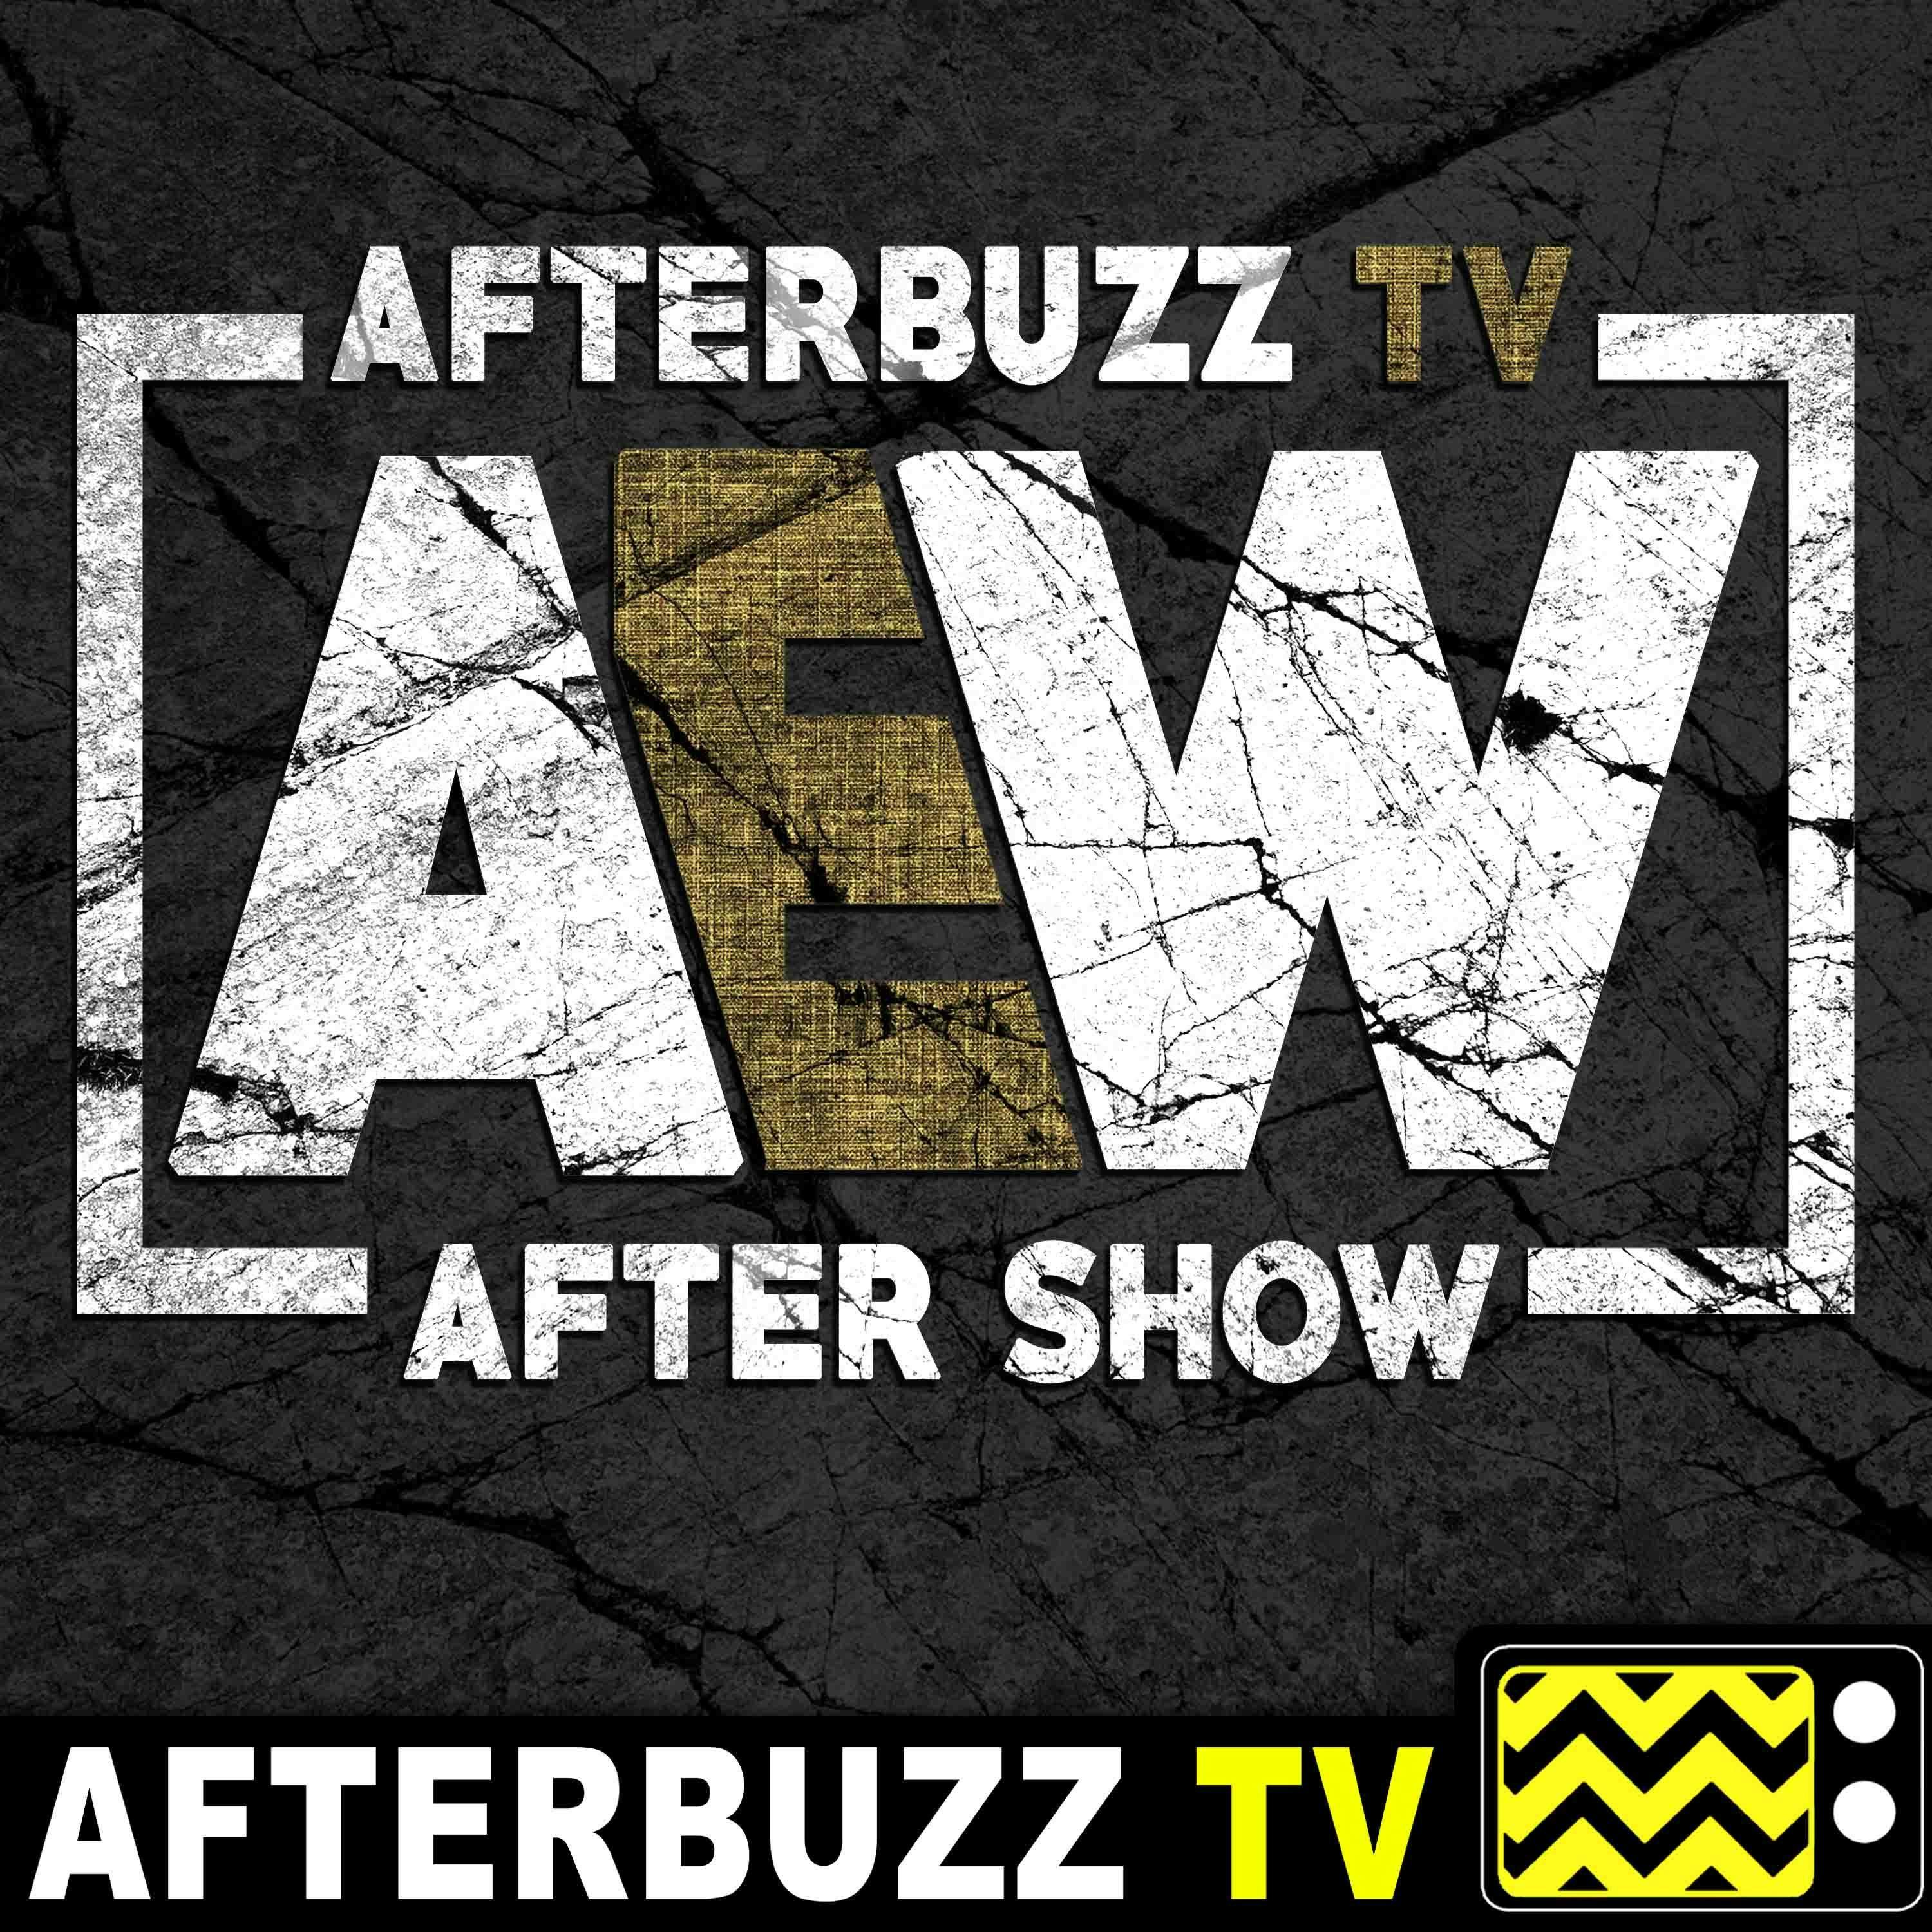 Freshly Squeezed Squeezes Back On The Go Home Dynamite To Fyter Fest - All Elite Wrestling Recap & After Show